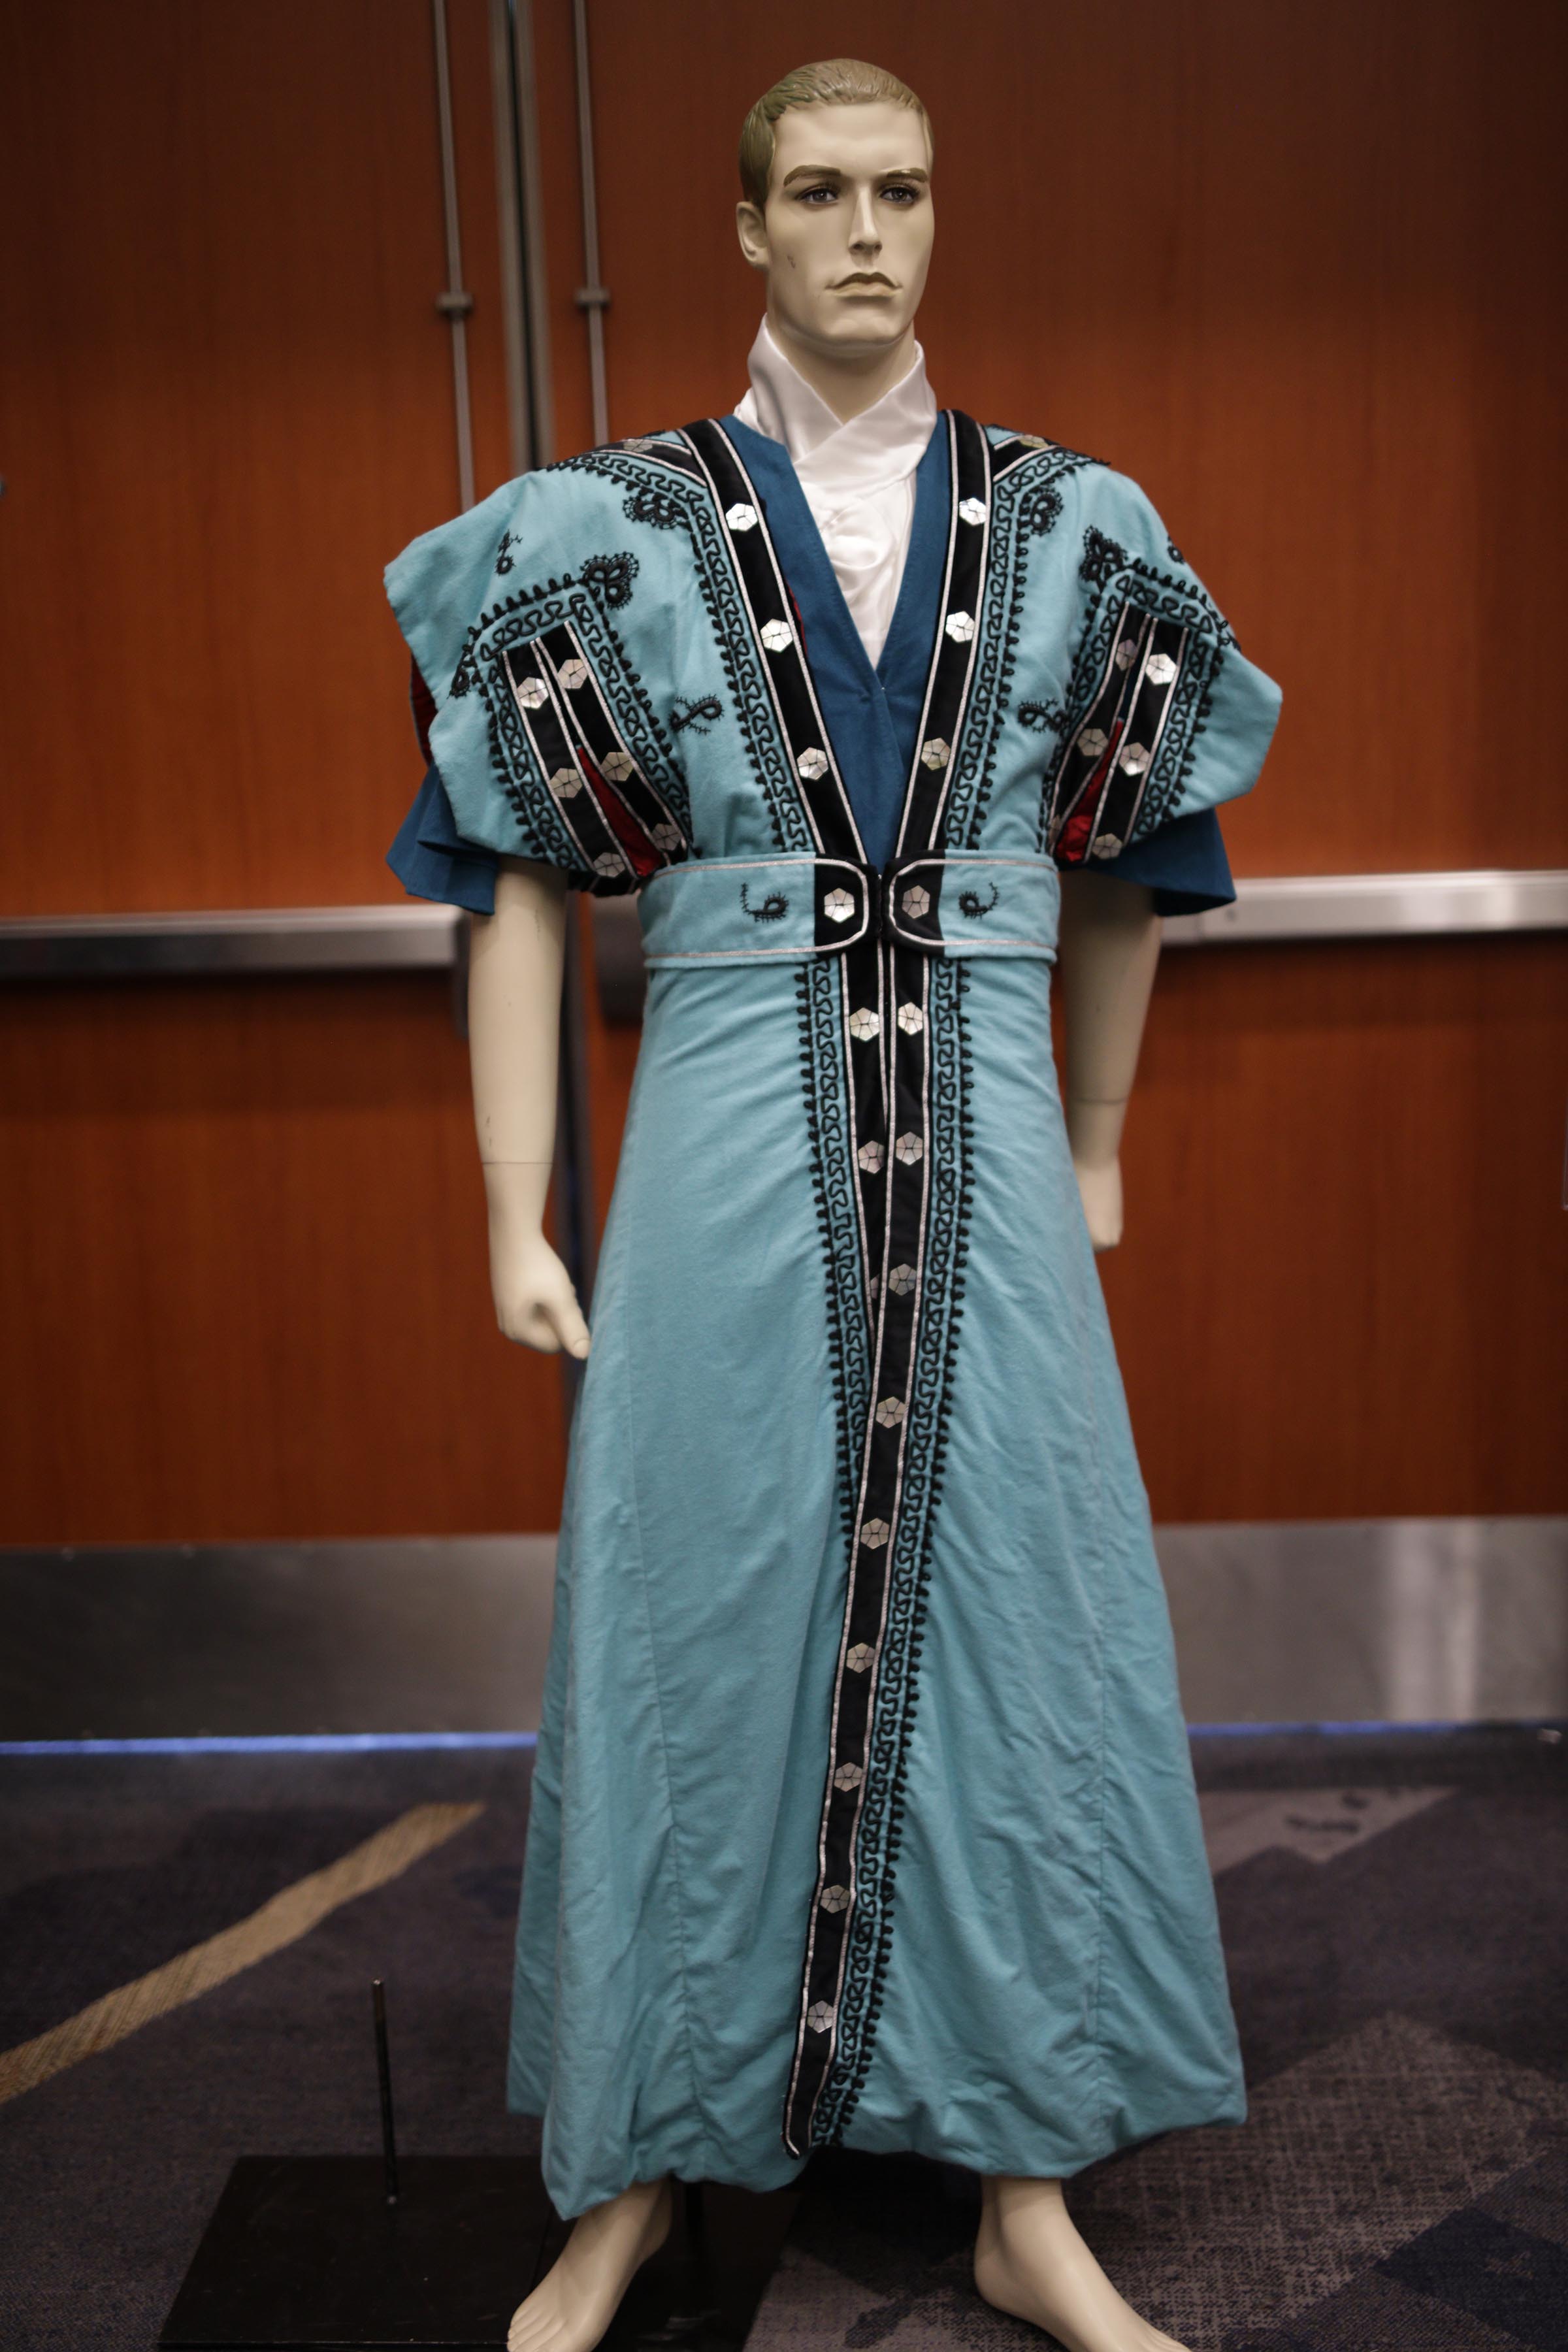 Exhibits 2022 - Male costume in blue on mannequin. Image by Art Andrews